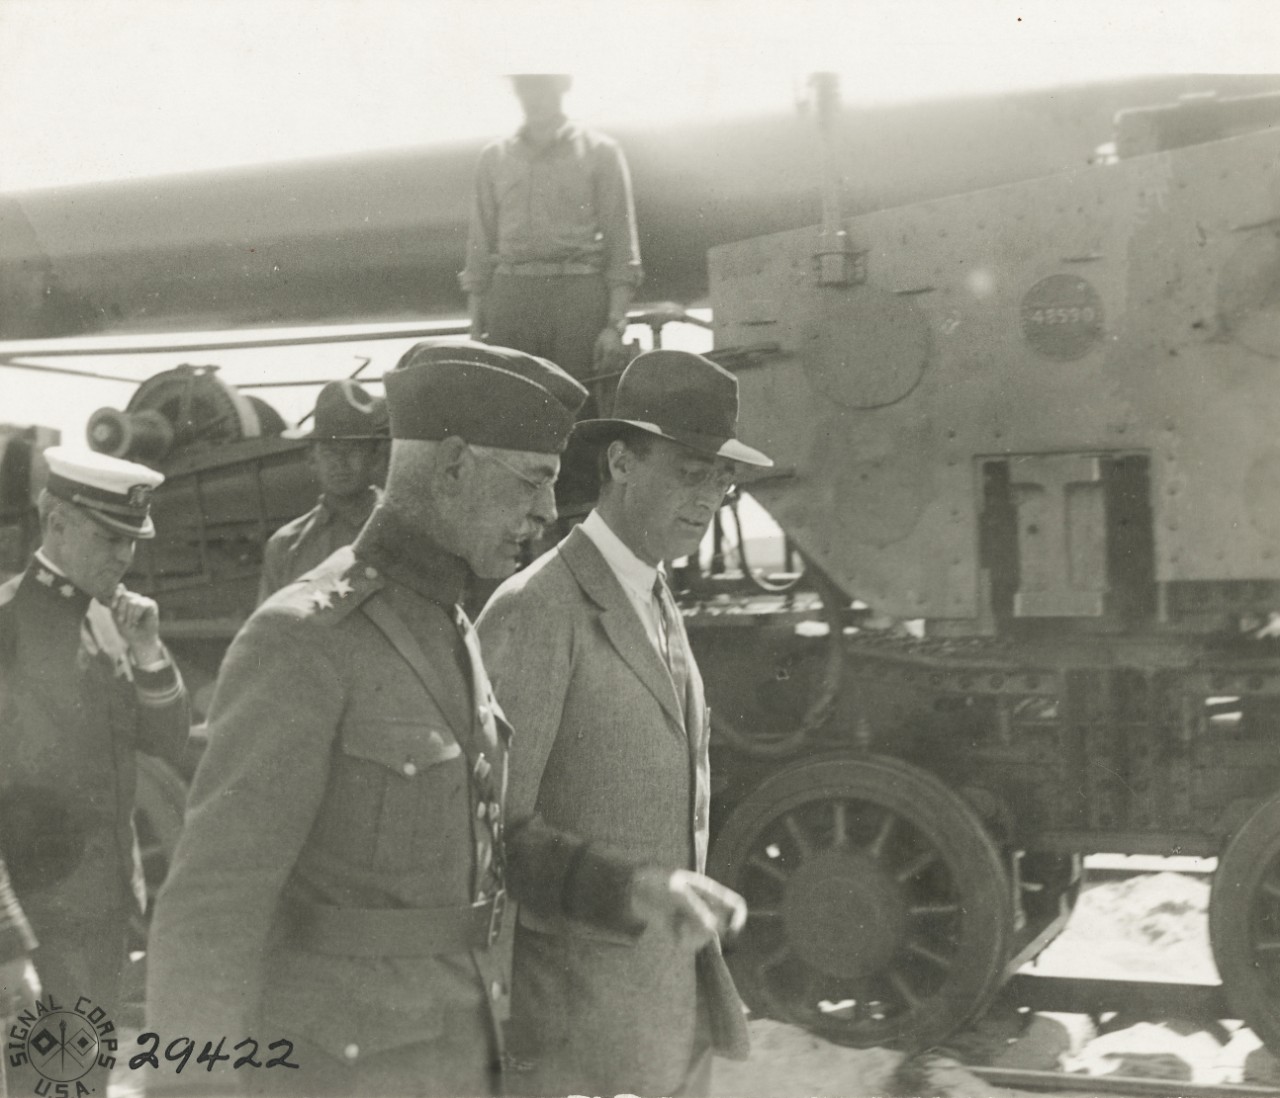 <p>111-SC-29422: Rear Admiral Charles P. Plunkett, USN, and Franklin D. Roosevelt, Assistant Secretary of the Navy on a tour of inspection of U.S. Naval Railway Battery, Montoir, France. Photographed by Corporal L.H. McLaughlin, SC, August 1, 1918. U.S. Army Signal Corps Photograph, now in the collections of the National Archives. Archival photograph taken by Mr. James Poynor.</p>
